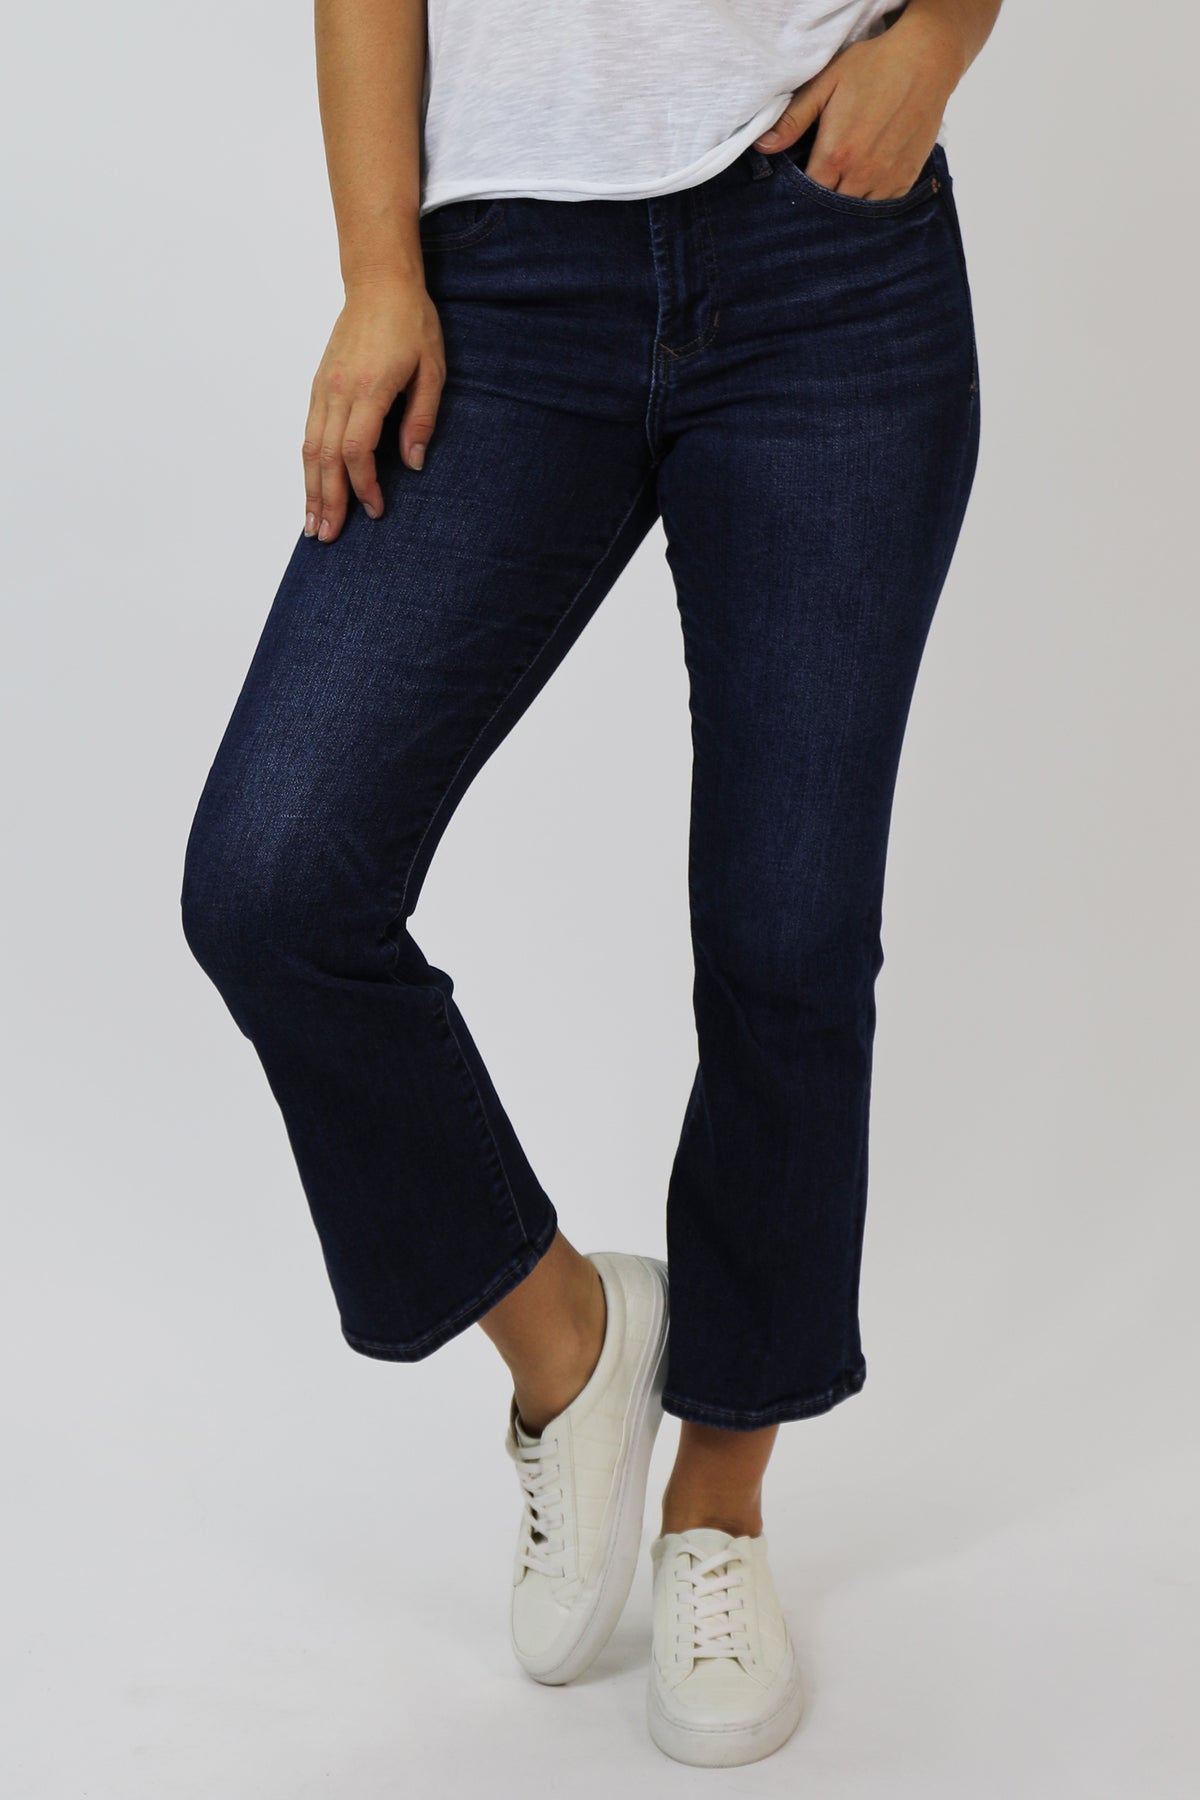 Slim Flare Jeans in Dark Wash - Usolo Outfitters